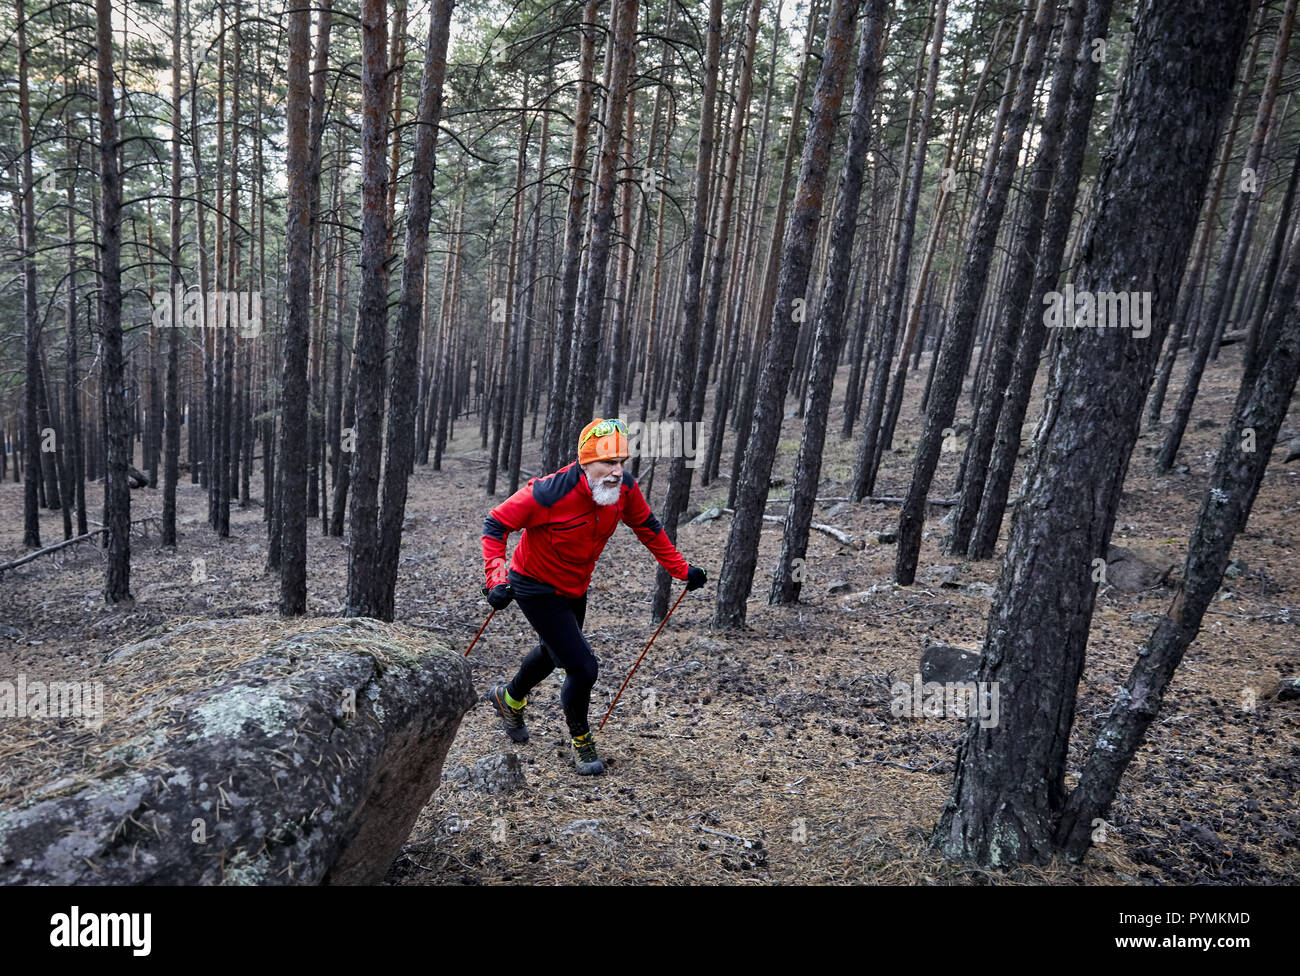 Bearded man in red shirt hiking in the pine forest. Trail running concept Stock Photo